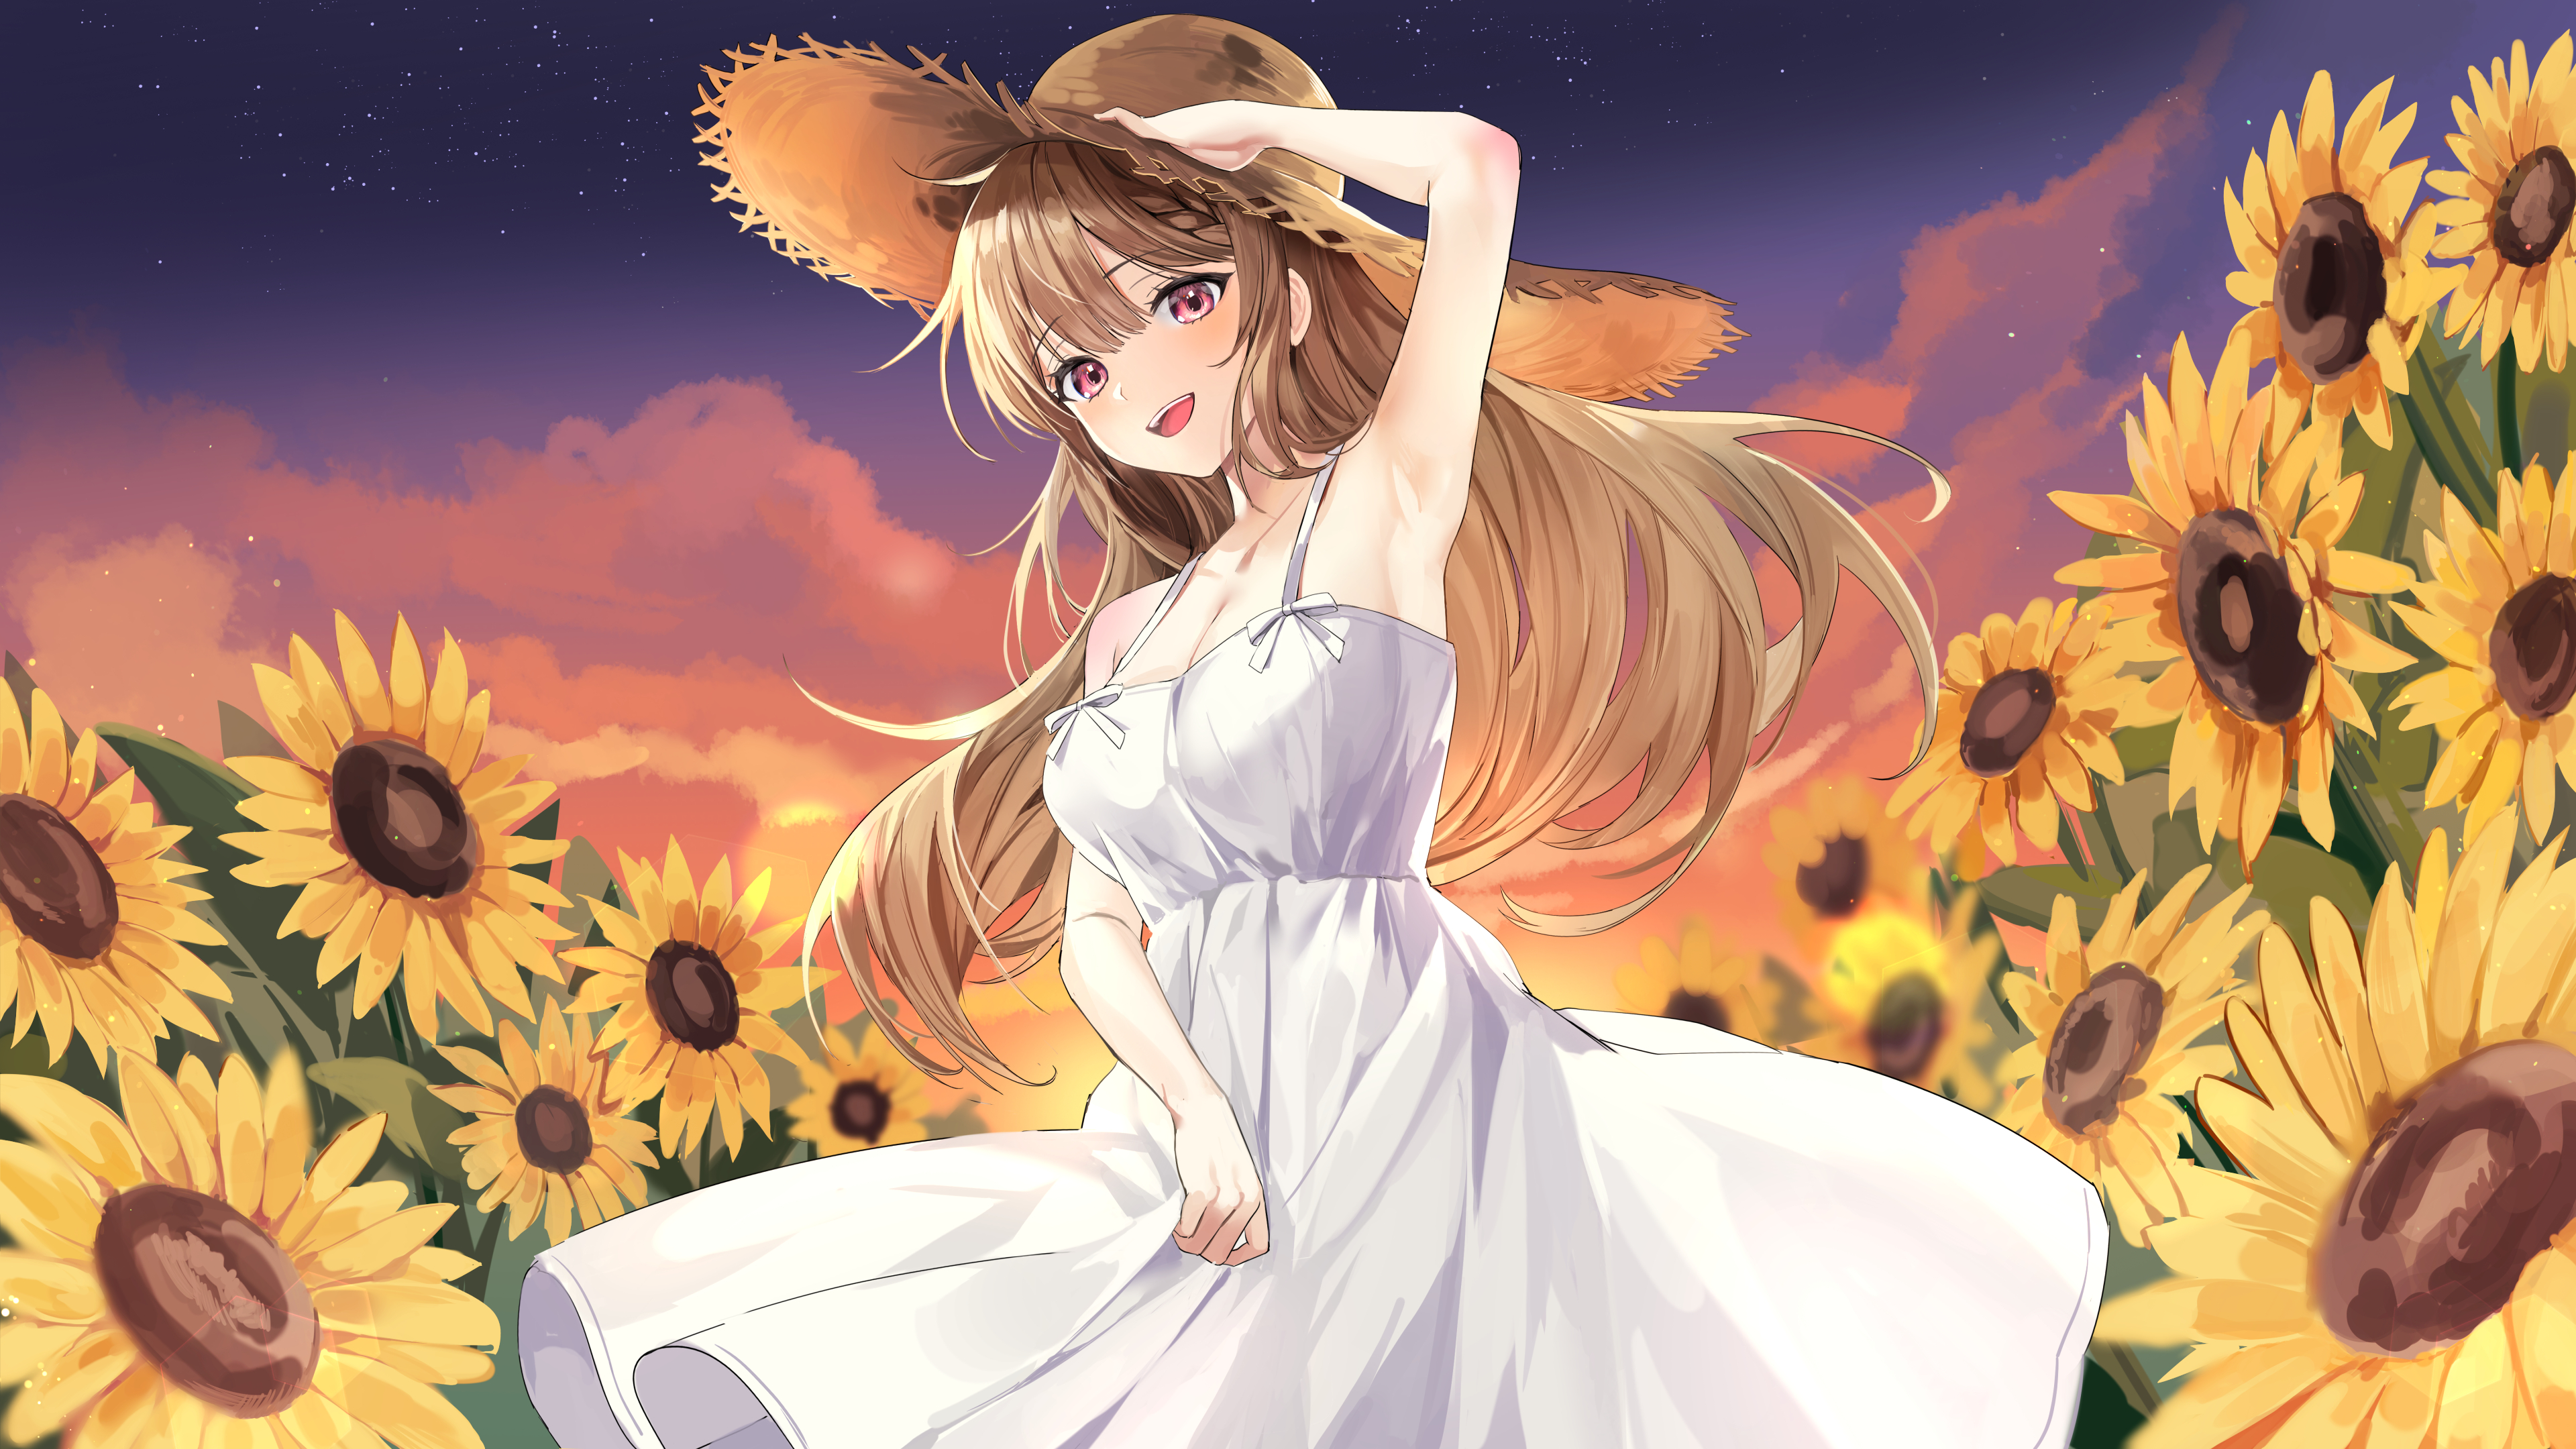 Anime Anime Girls Hat Women With Hats Flowers Plants Sunflowers Red Eyes Women Outdoors Yellow Flowe 3840x2160